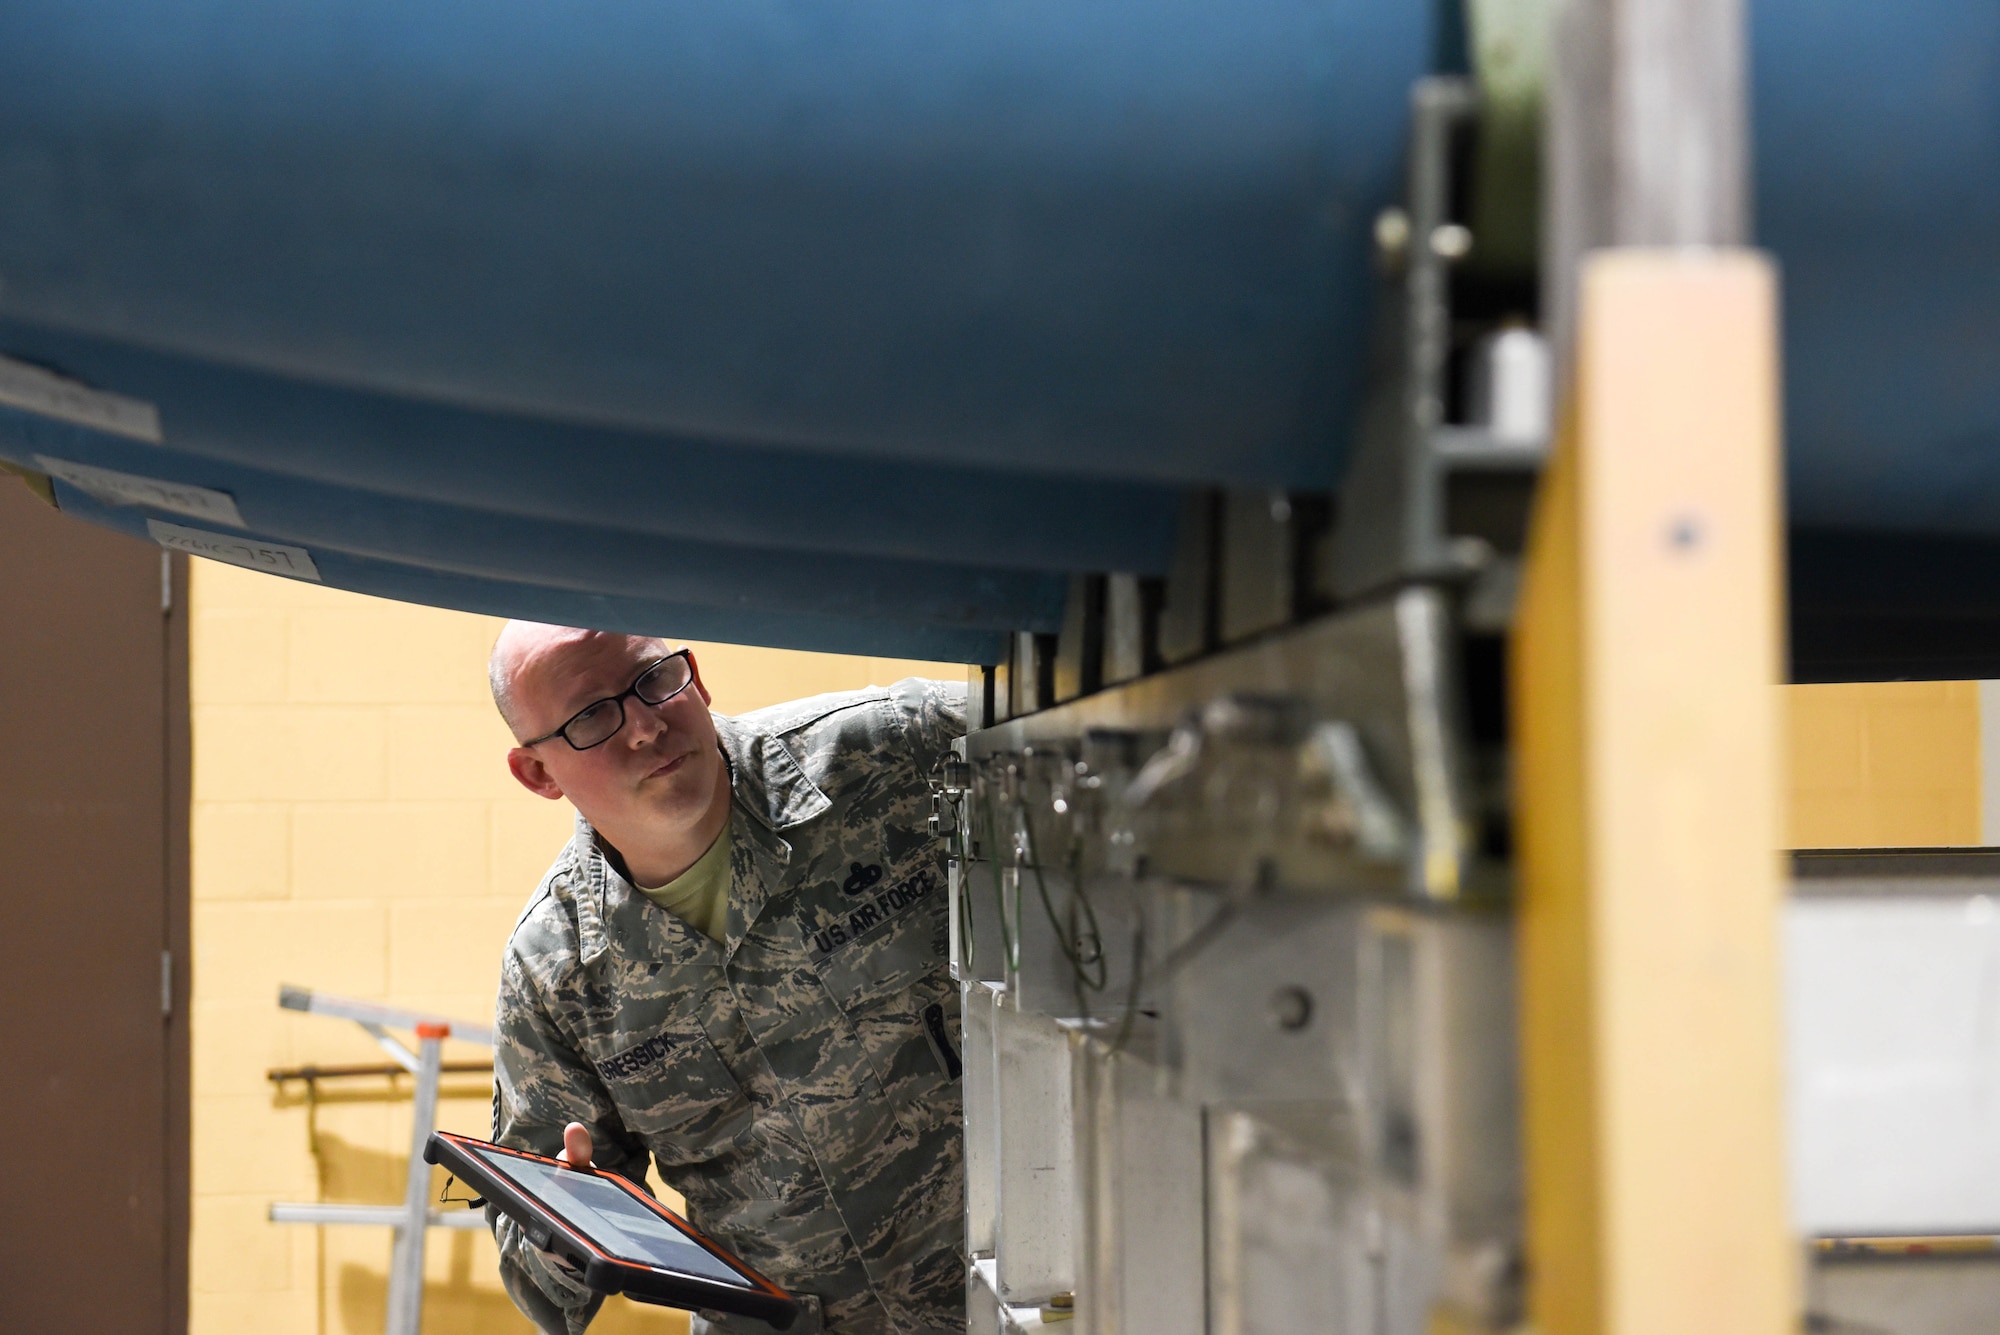 Master Sgt. James Gressick, a U.S. Air Force Global Strike Command Conventional Munitions Division command munitions manager, inspects the completed bombs during the qualifying round of the second annual Air Force Combat Operations Competition on Ellsworth Air Force Base, S.D., Feb. 5, 2019. The competition is Air Force-wide and is used to determine the best of the best in munitions operations. (U.S. Air Force photo by Amn John Ennis)